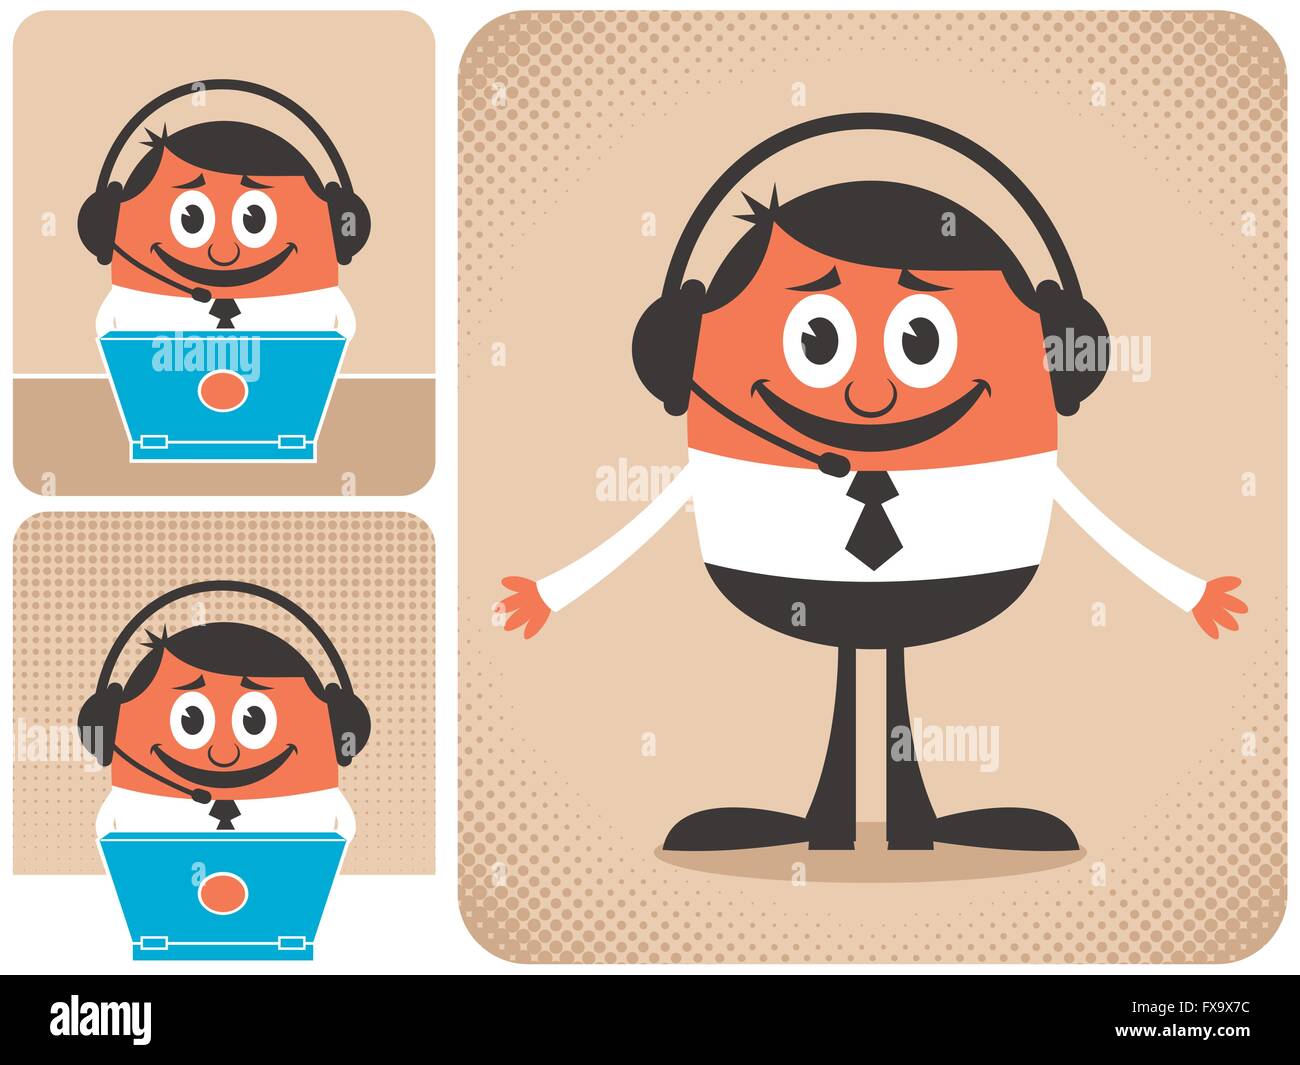 Technical support guy in 3 different versions. Stock Vector